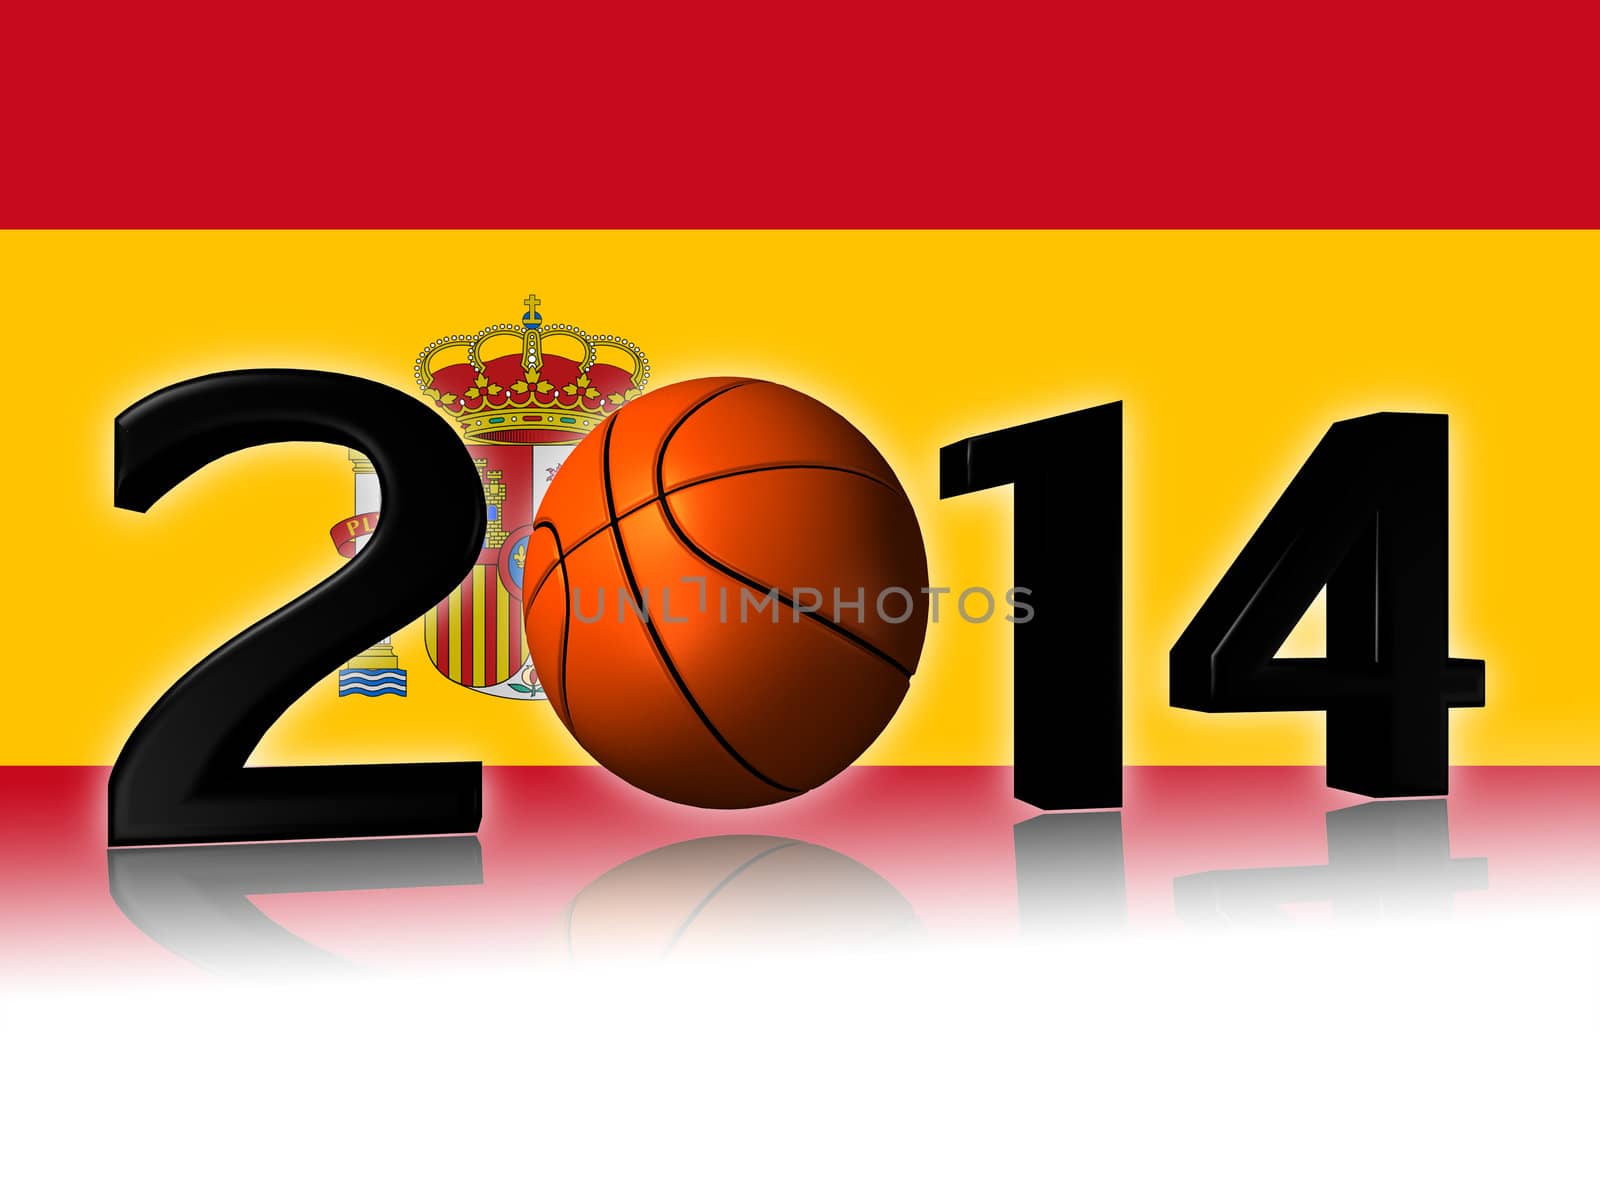 It's a big 2014 basketball logo with spain flag in background